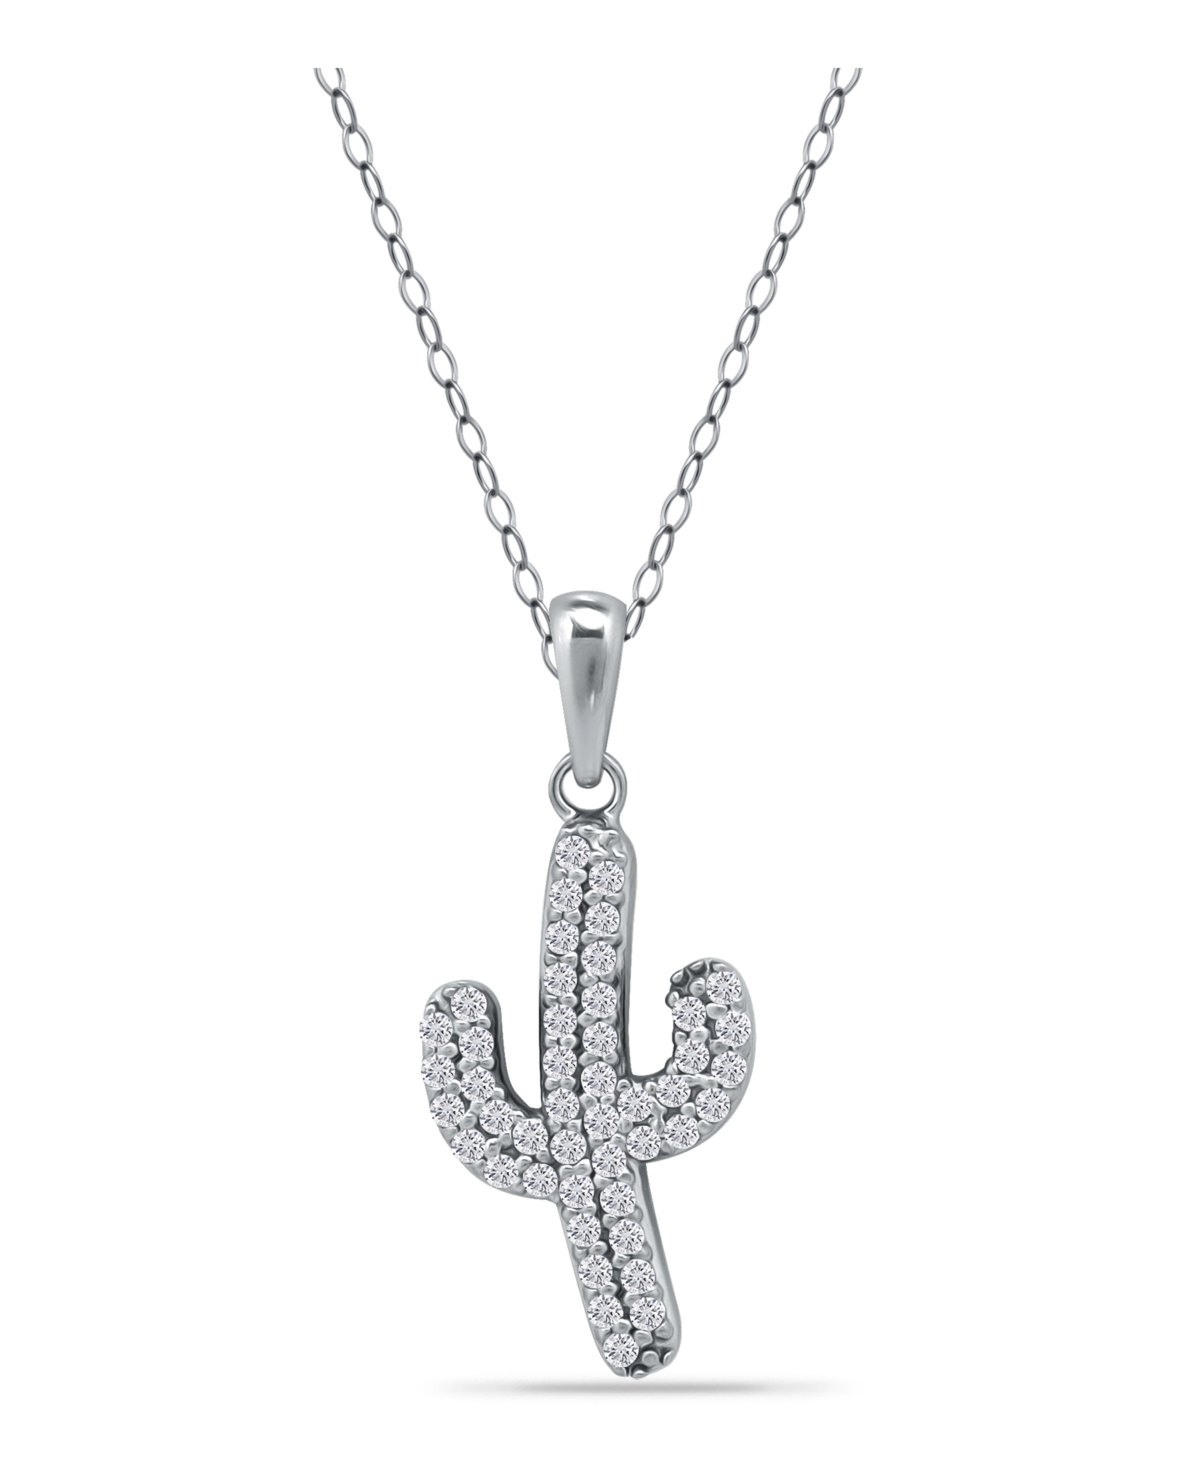 Giani Bernini Cubic Zirconia Pave Cactus Pendant Necklace In Sterling Silver